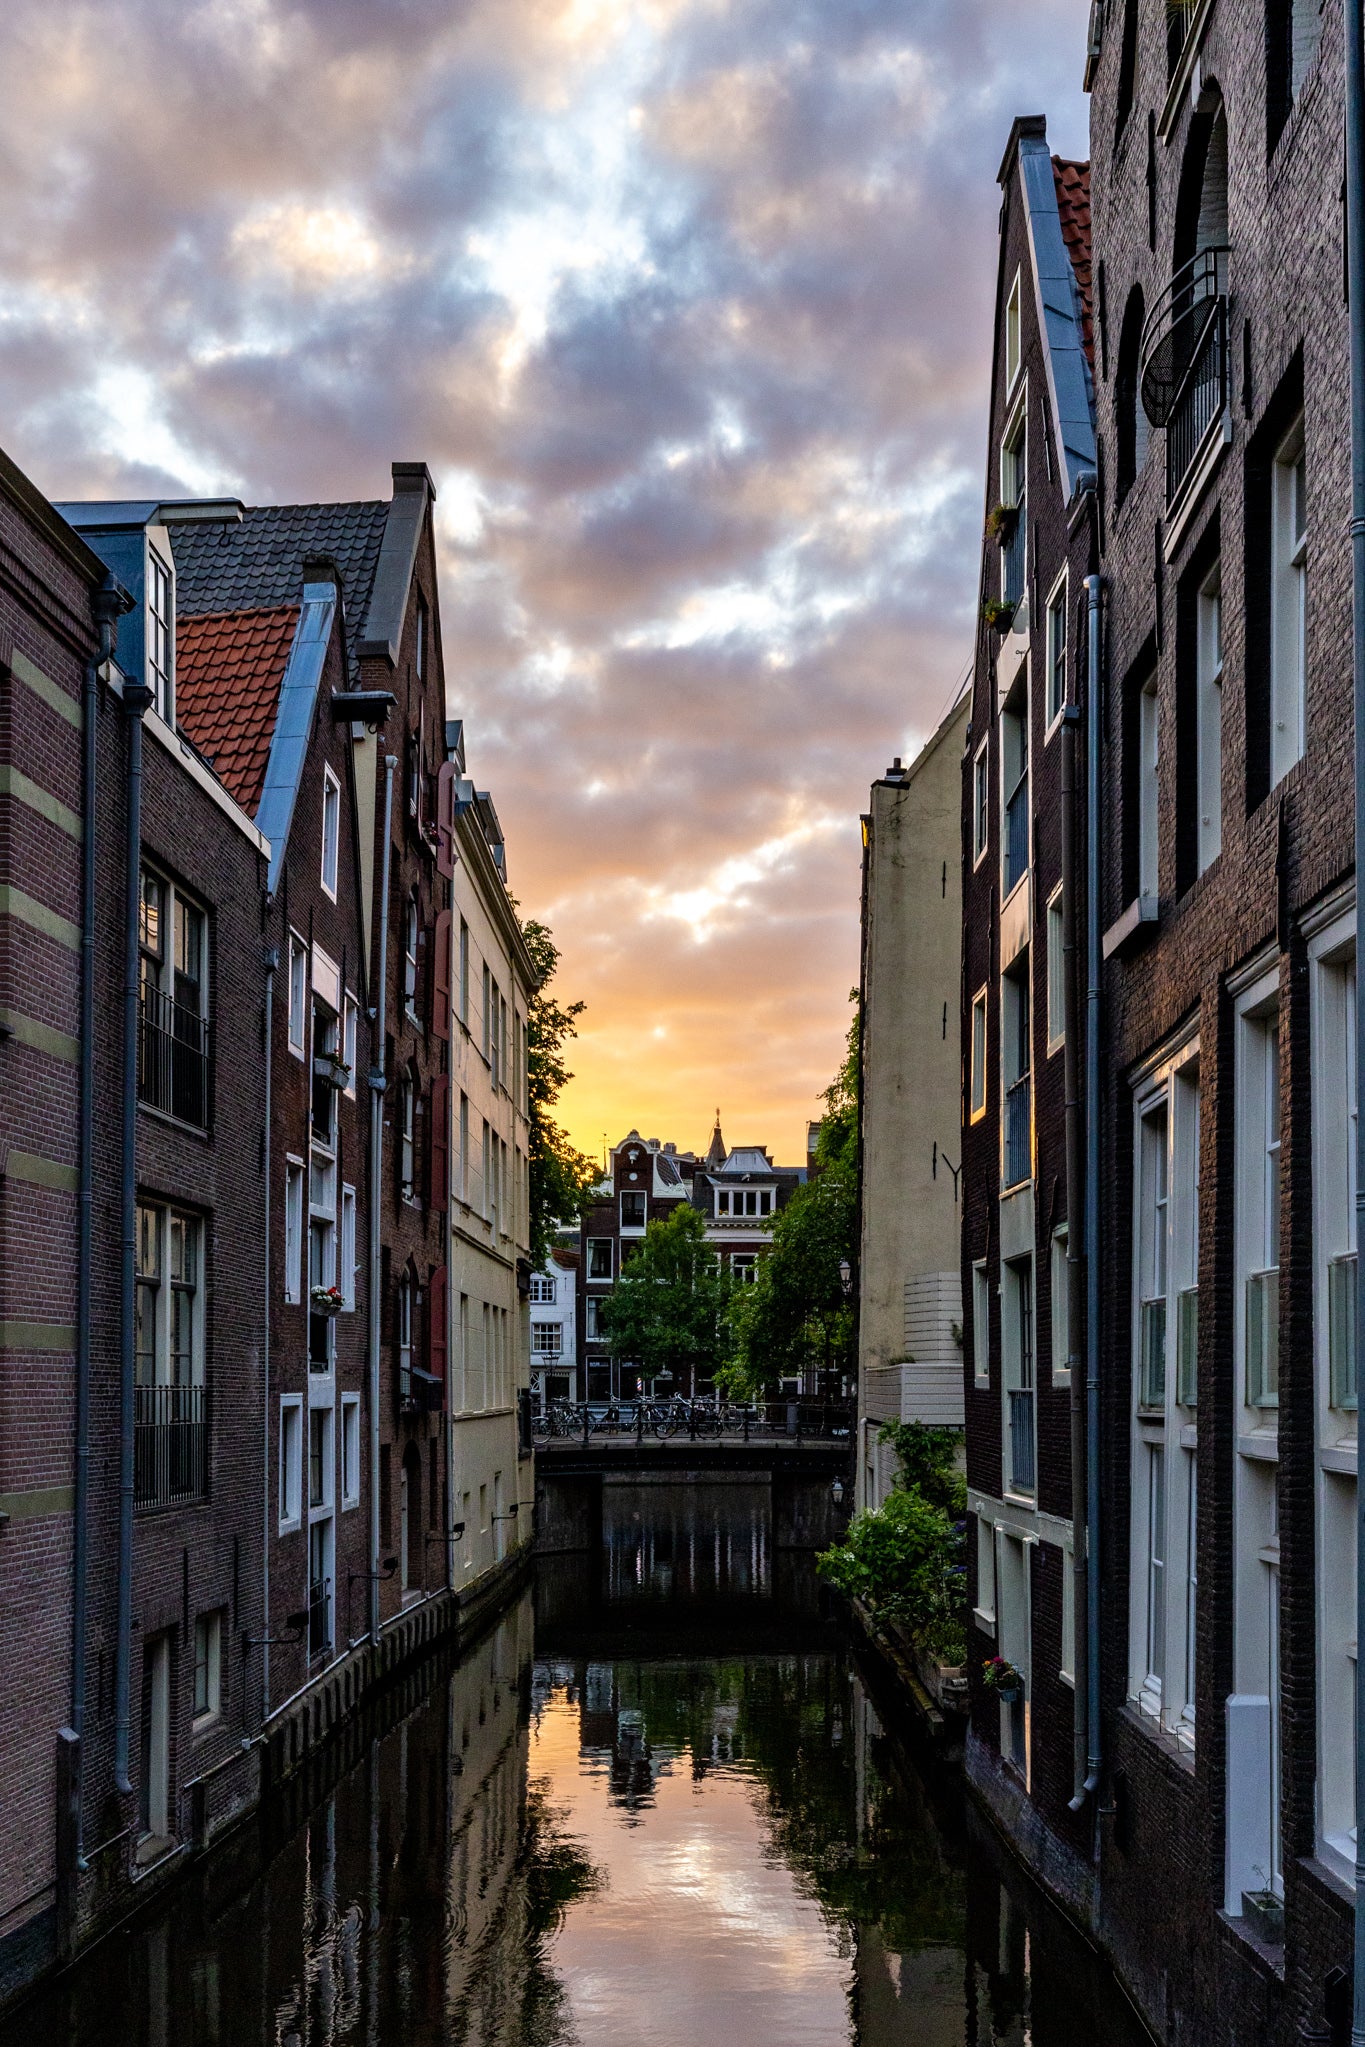 Sunrise over Amsterdam canals